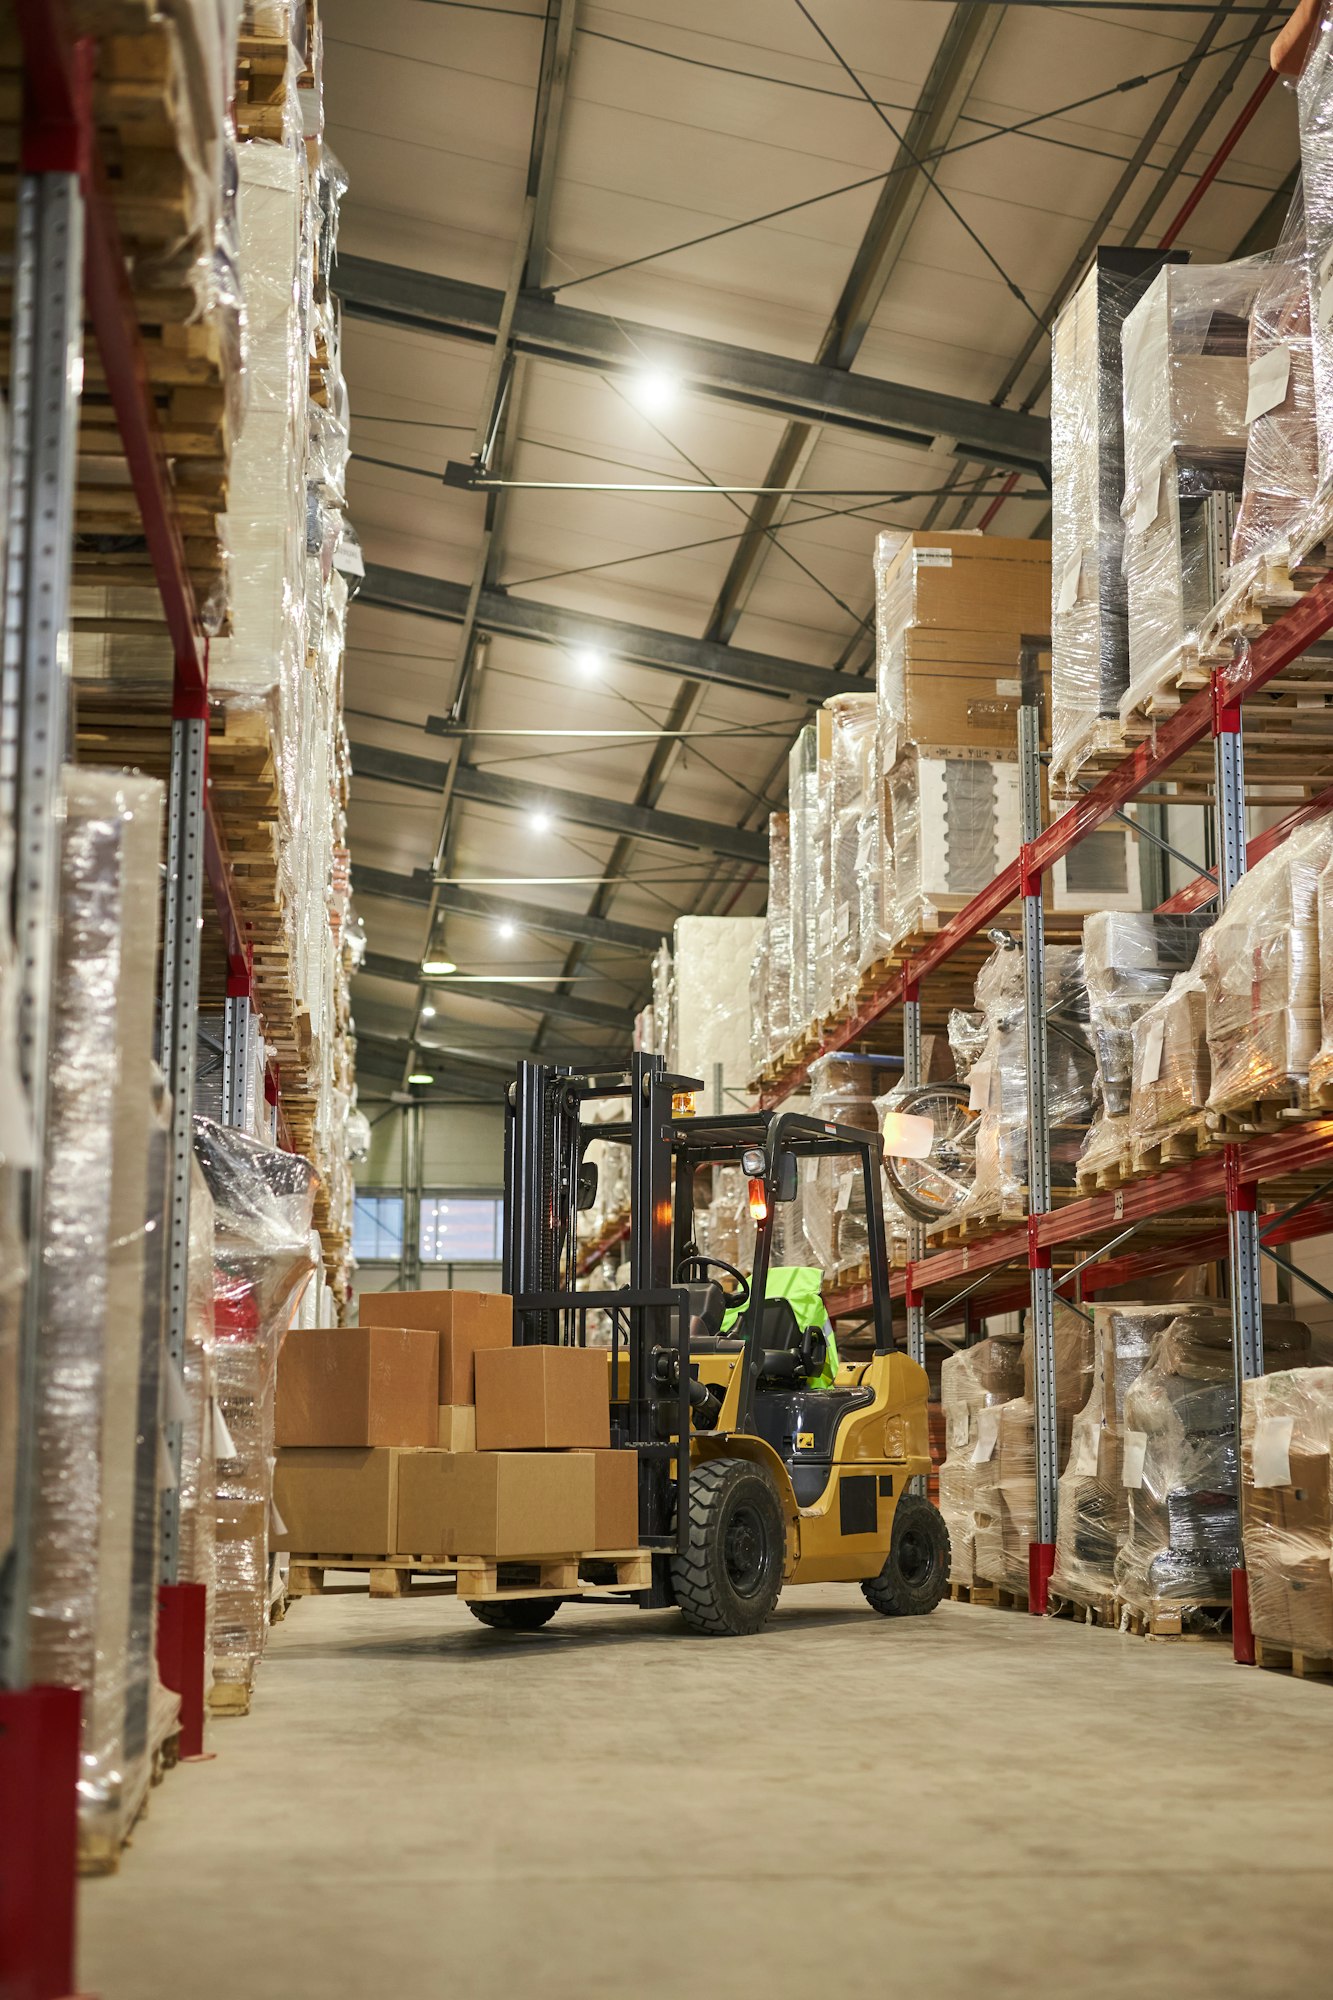 Vertical background image of warehouse interior with forklift